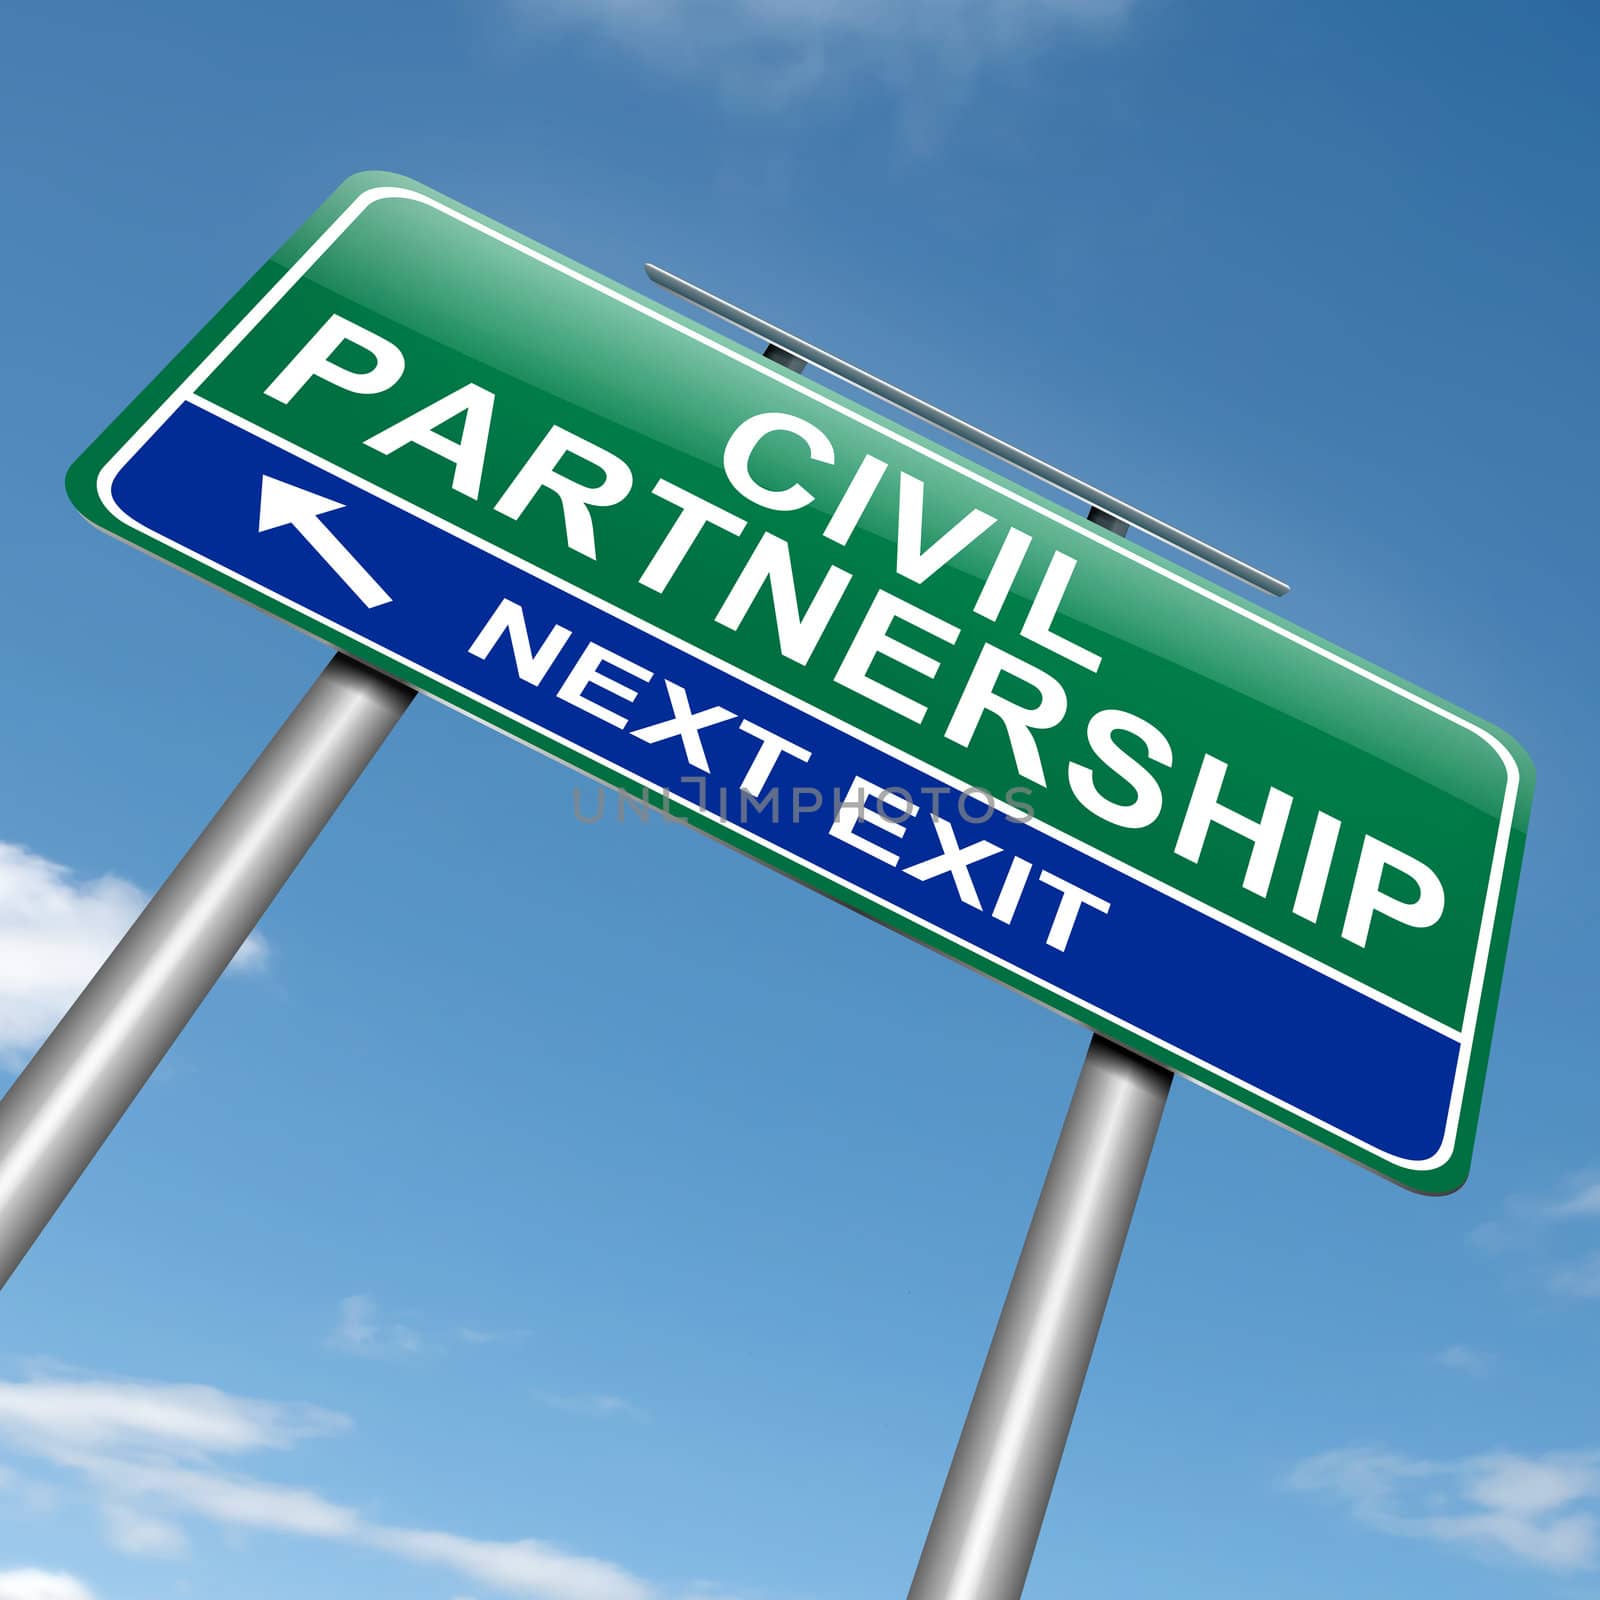 Illustration depicting a roadsign with a civil partnership concept. Sky background.